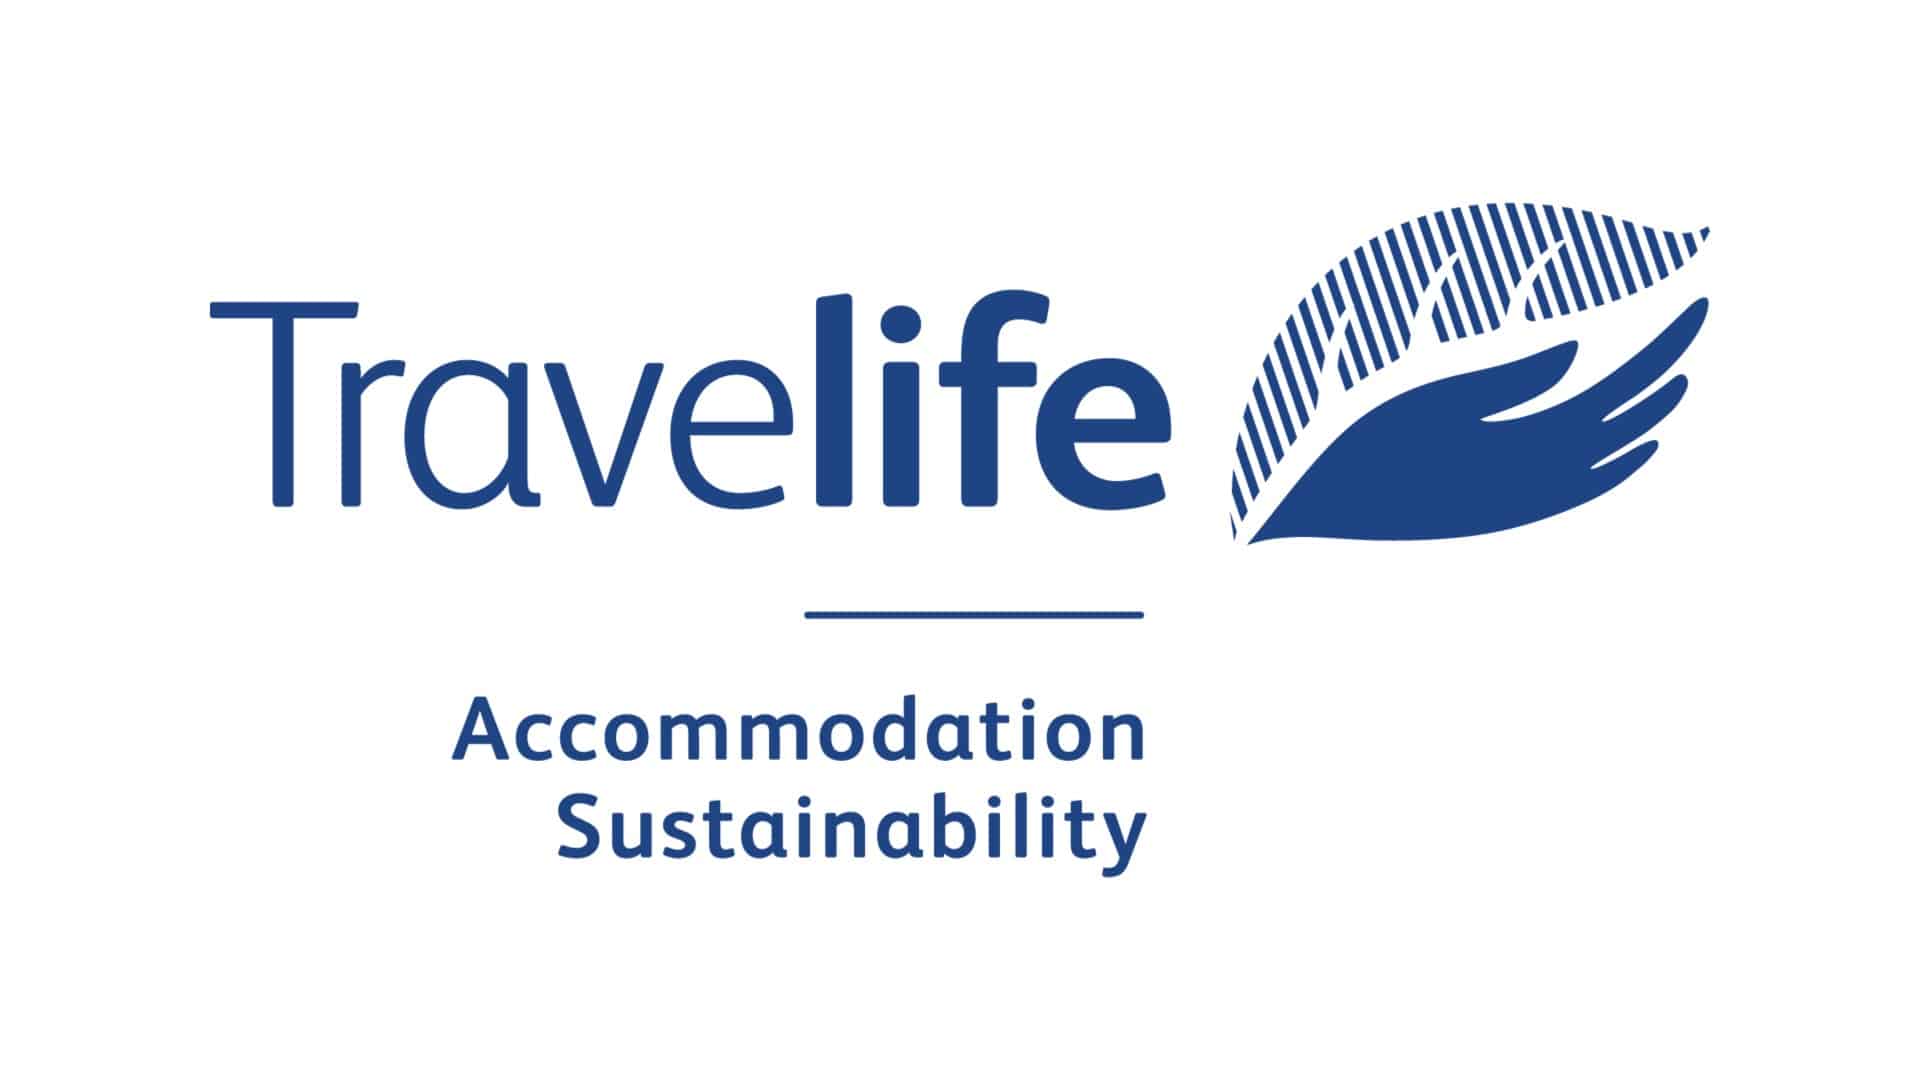 Cayo received a Gold Certification in Accommodation Sustainability from Travelife